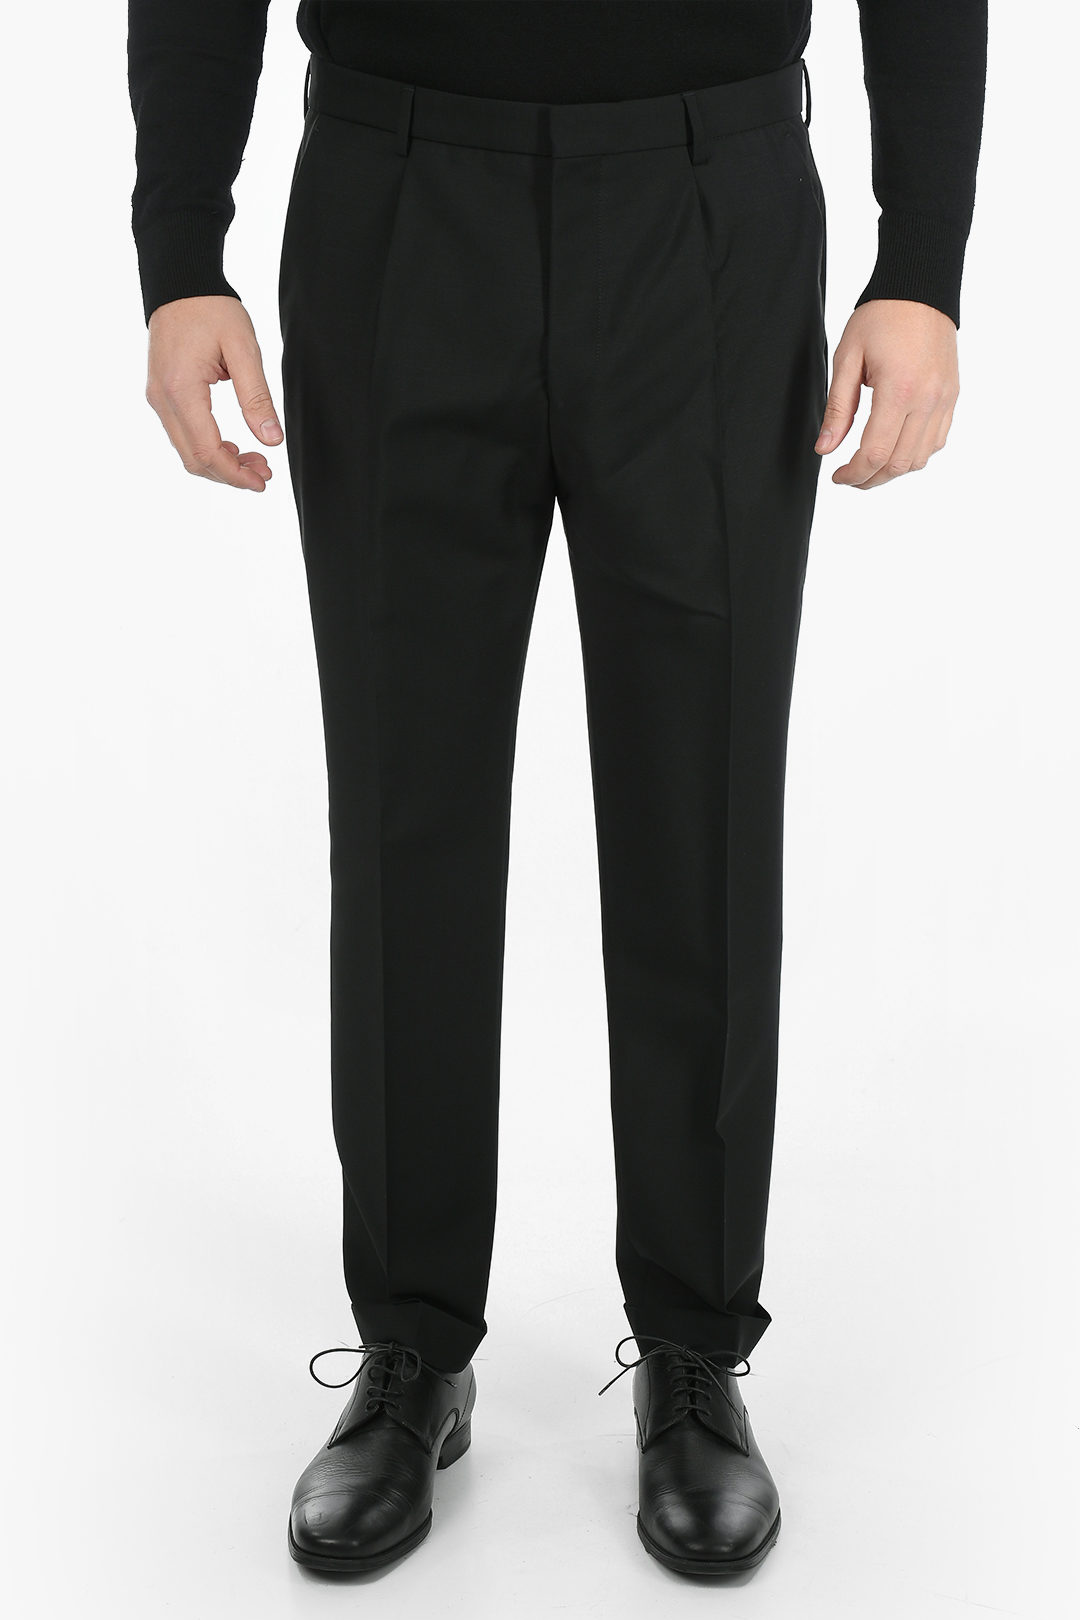 Buy Haggar men classicfit pleated stretch dress pants heather grey Online |  Brands For Less